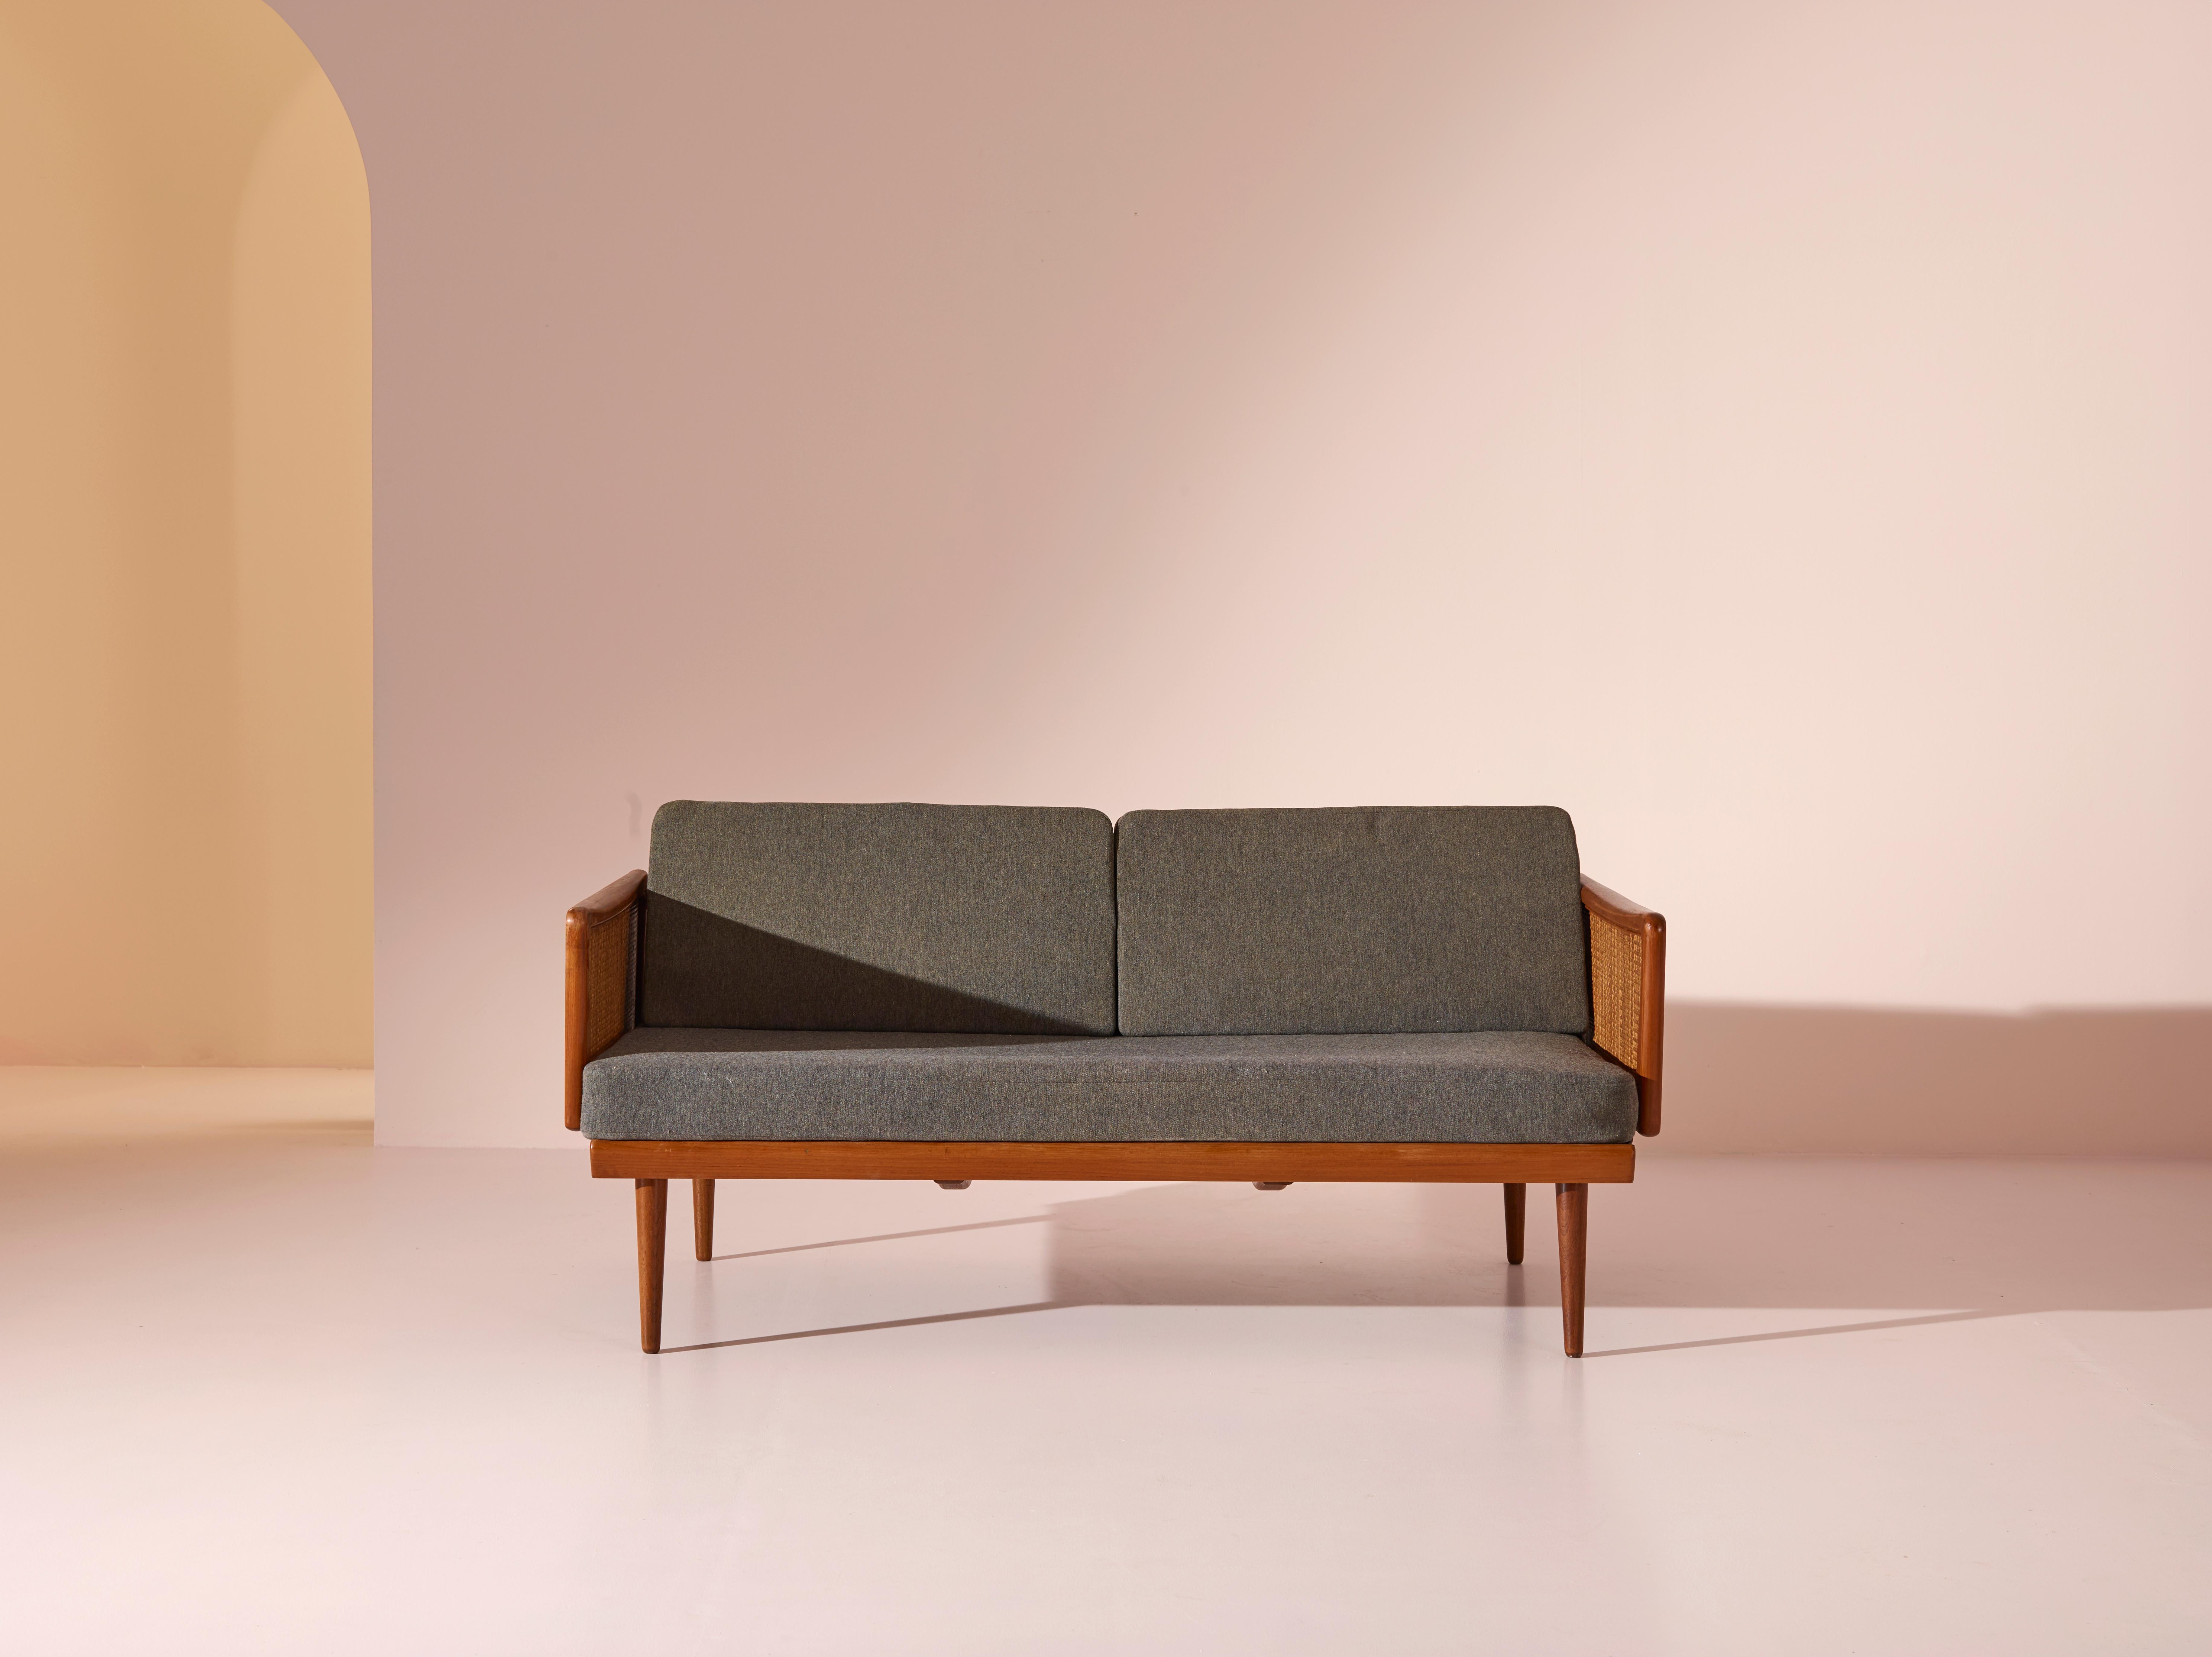 A beautiful FD451 articulated two seater sofa bed, designed by Peter Hvidt and Orla Mølgaard-Nielsen for France & Søn in Denmark around the 1960s.

One interesting feature of this sofa is its articulated armrests, which can be adjusted using a